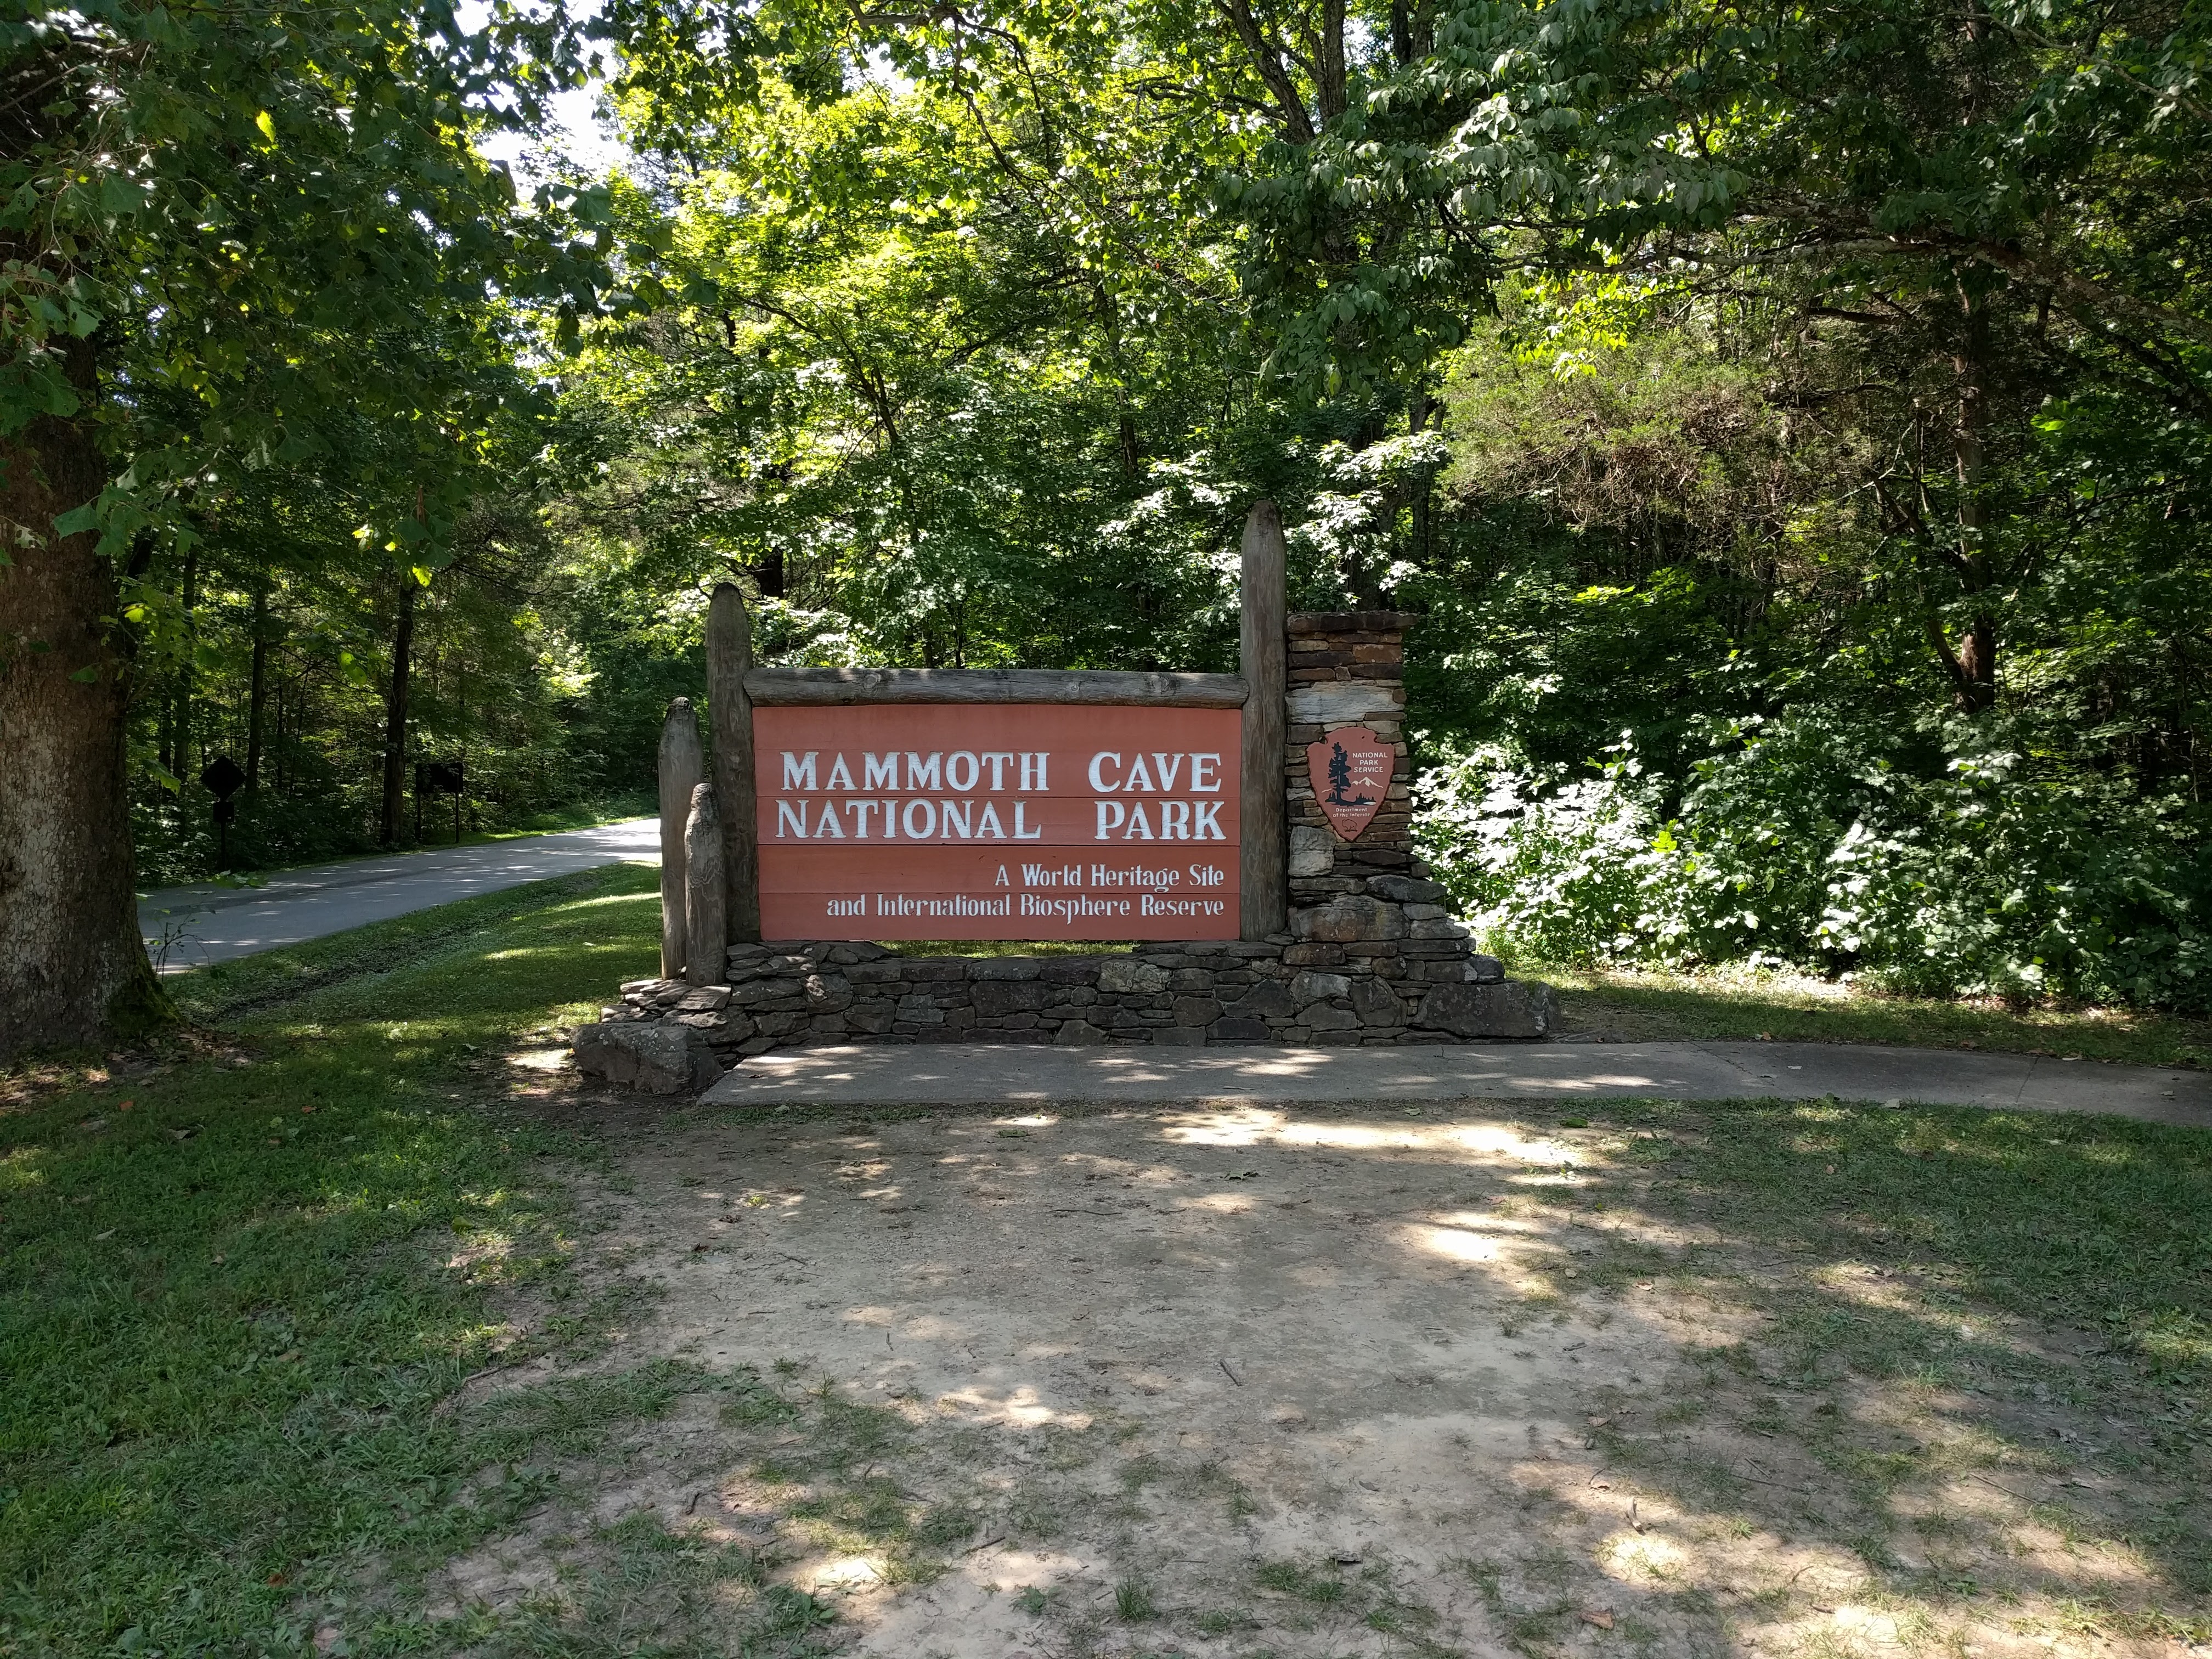 Mammoth Cave entrance sign